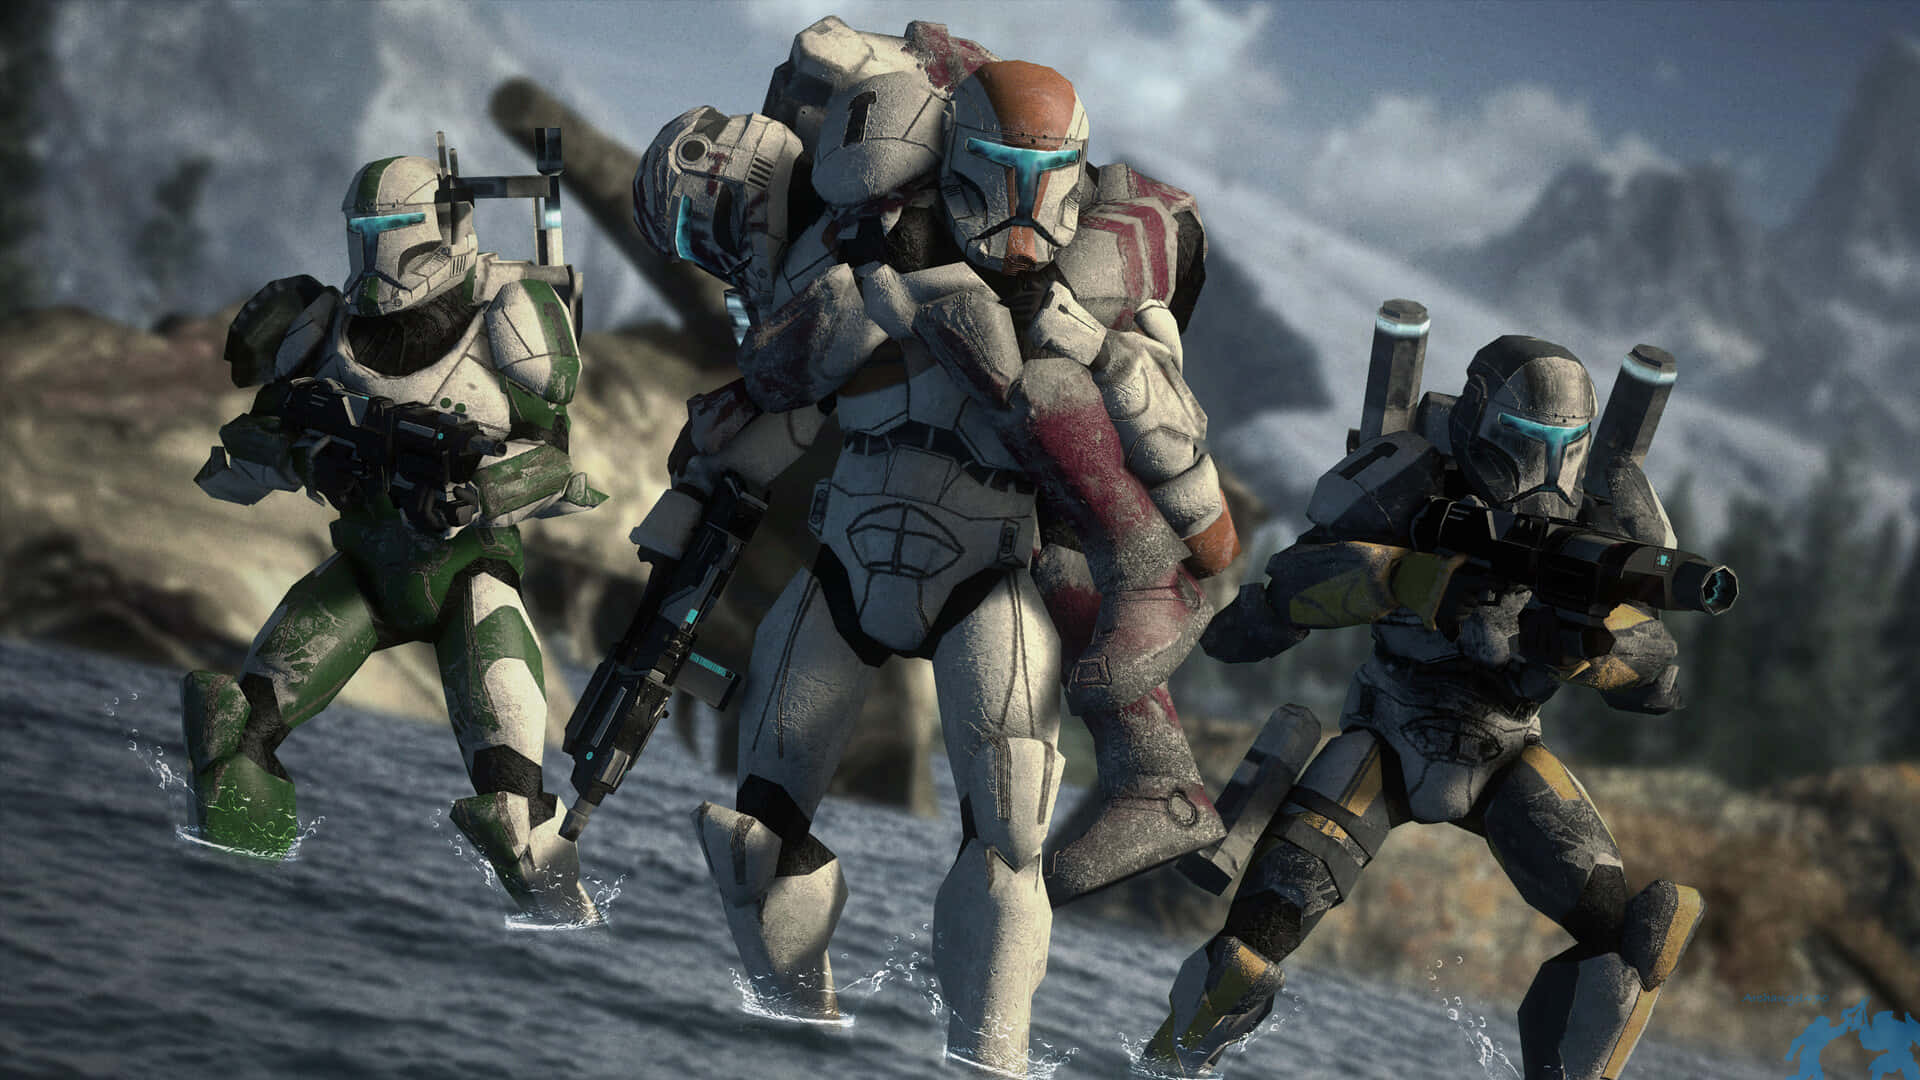 "Deploy your tactical squad in the heat of battle to complete your Republic Commando mission." Wallpaper